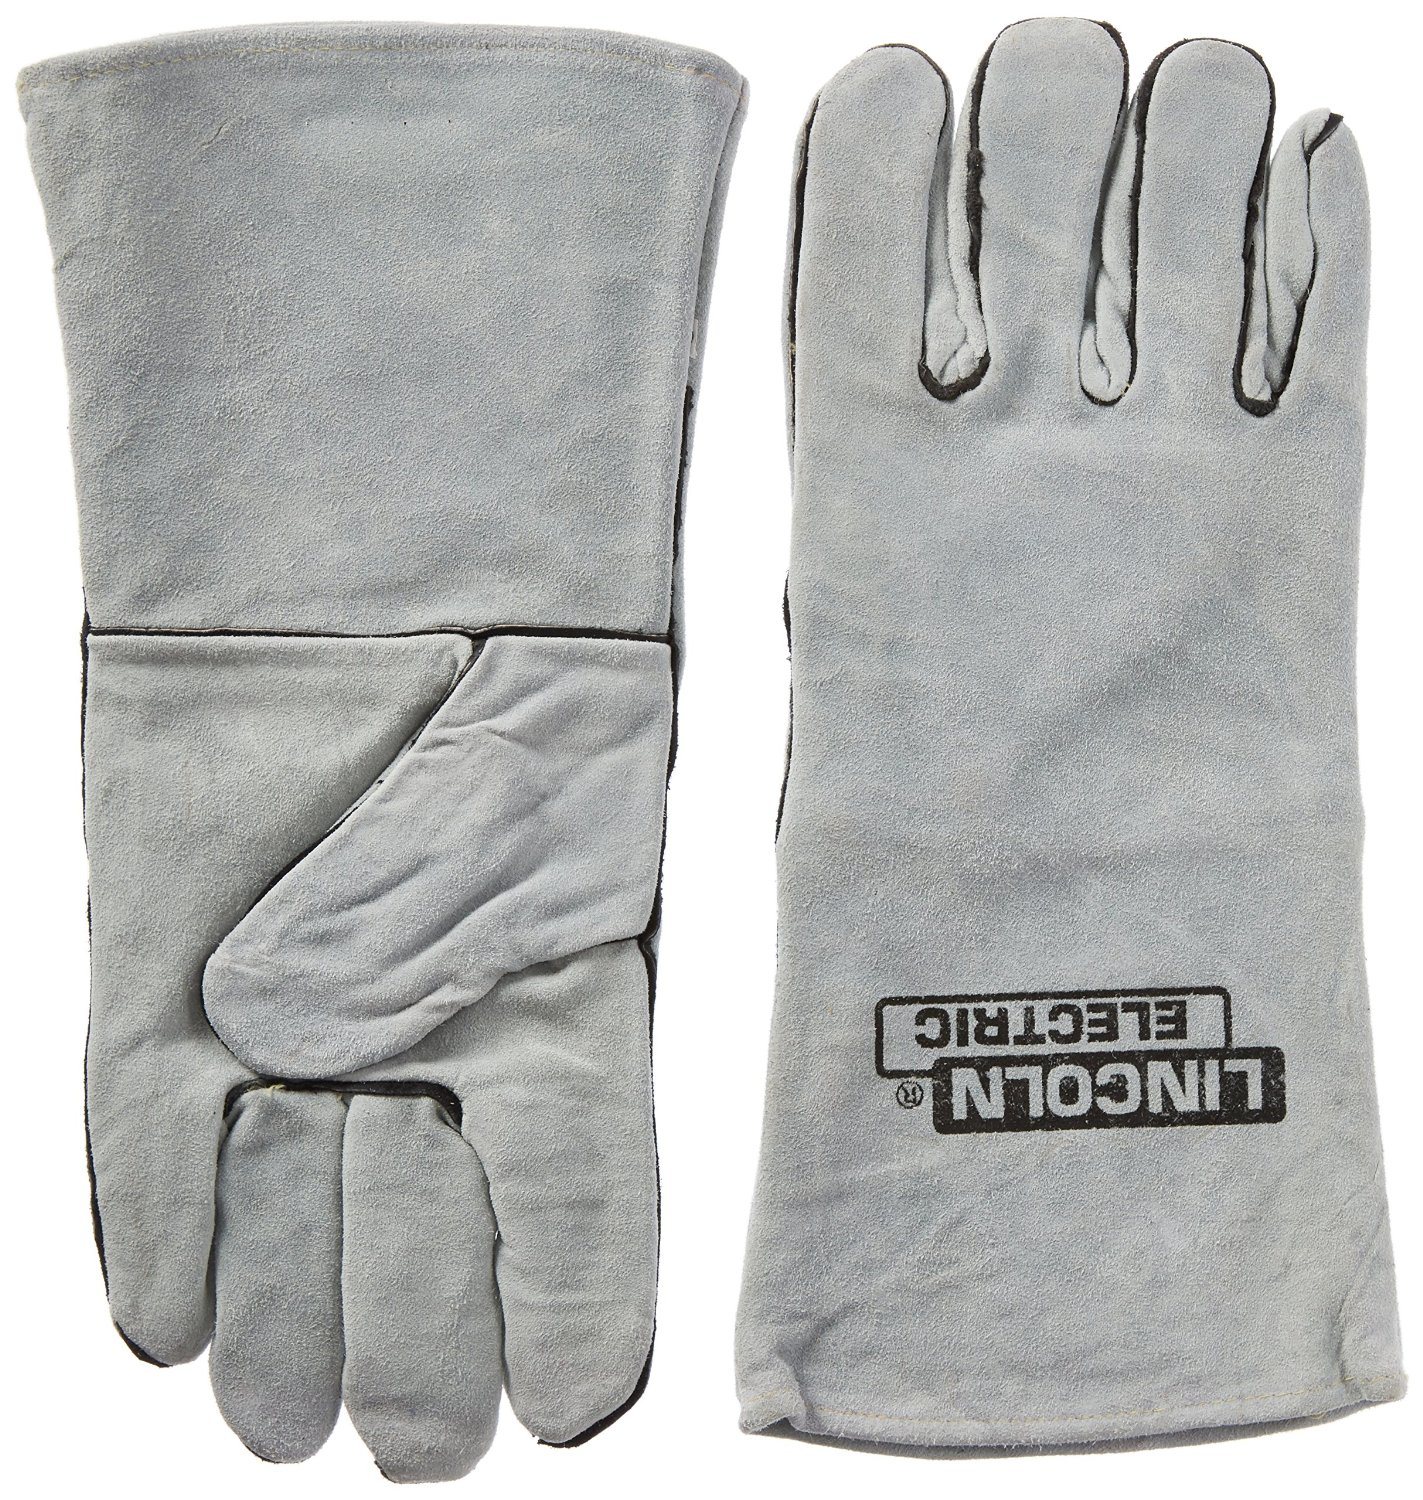 Lincoln Electric KH641 Leather Welding Gloves